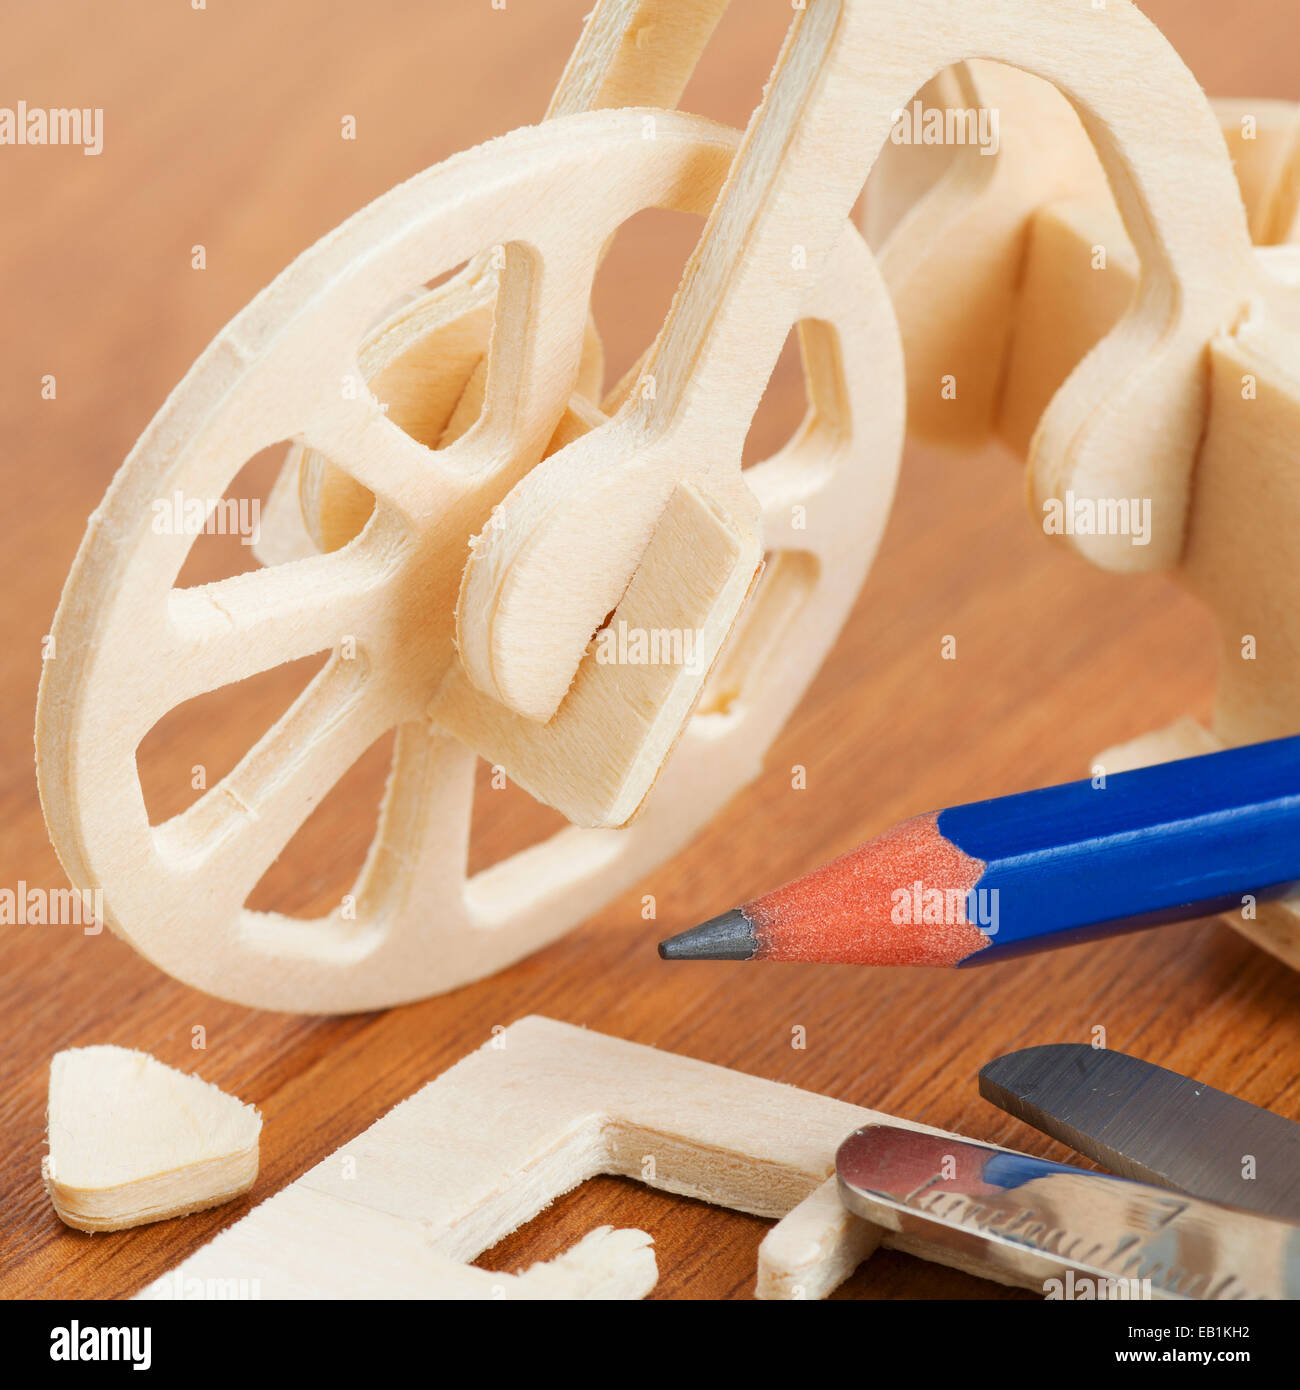 Bicicletta in legno toy - woodcraft construction kit Foto Stock